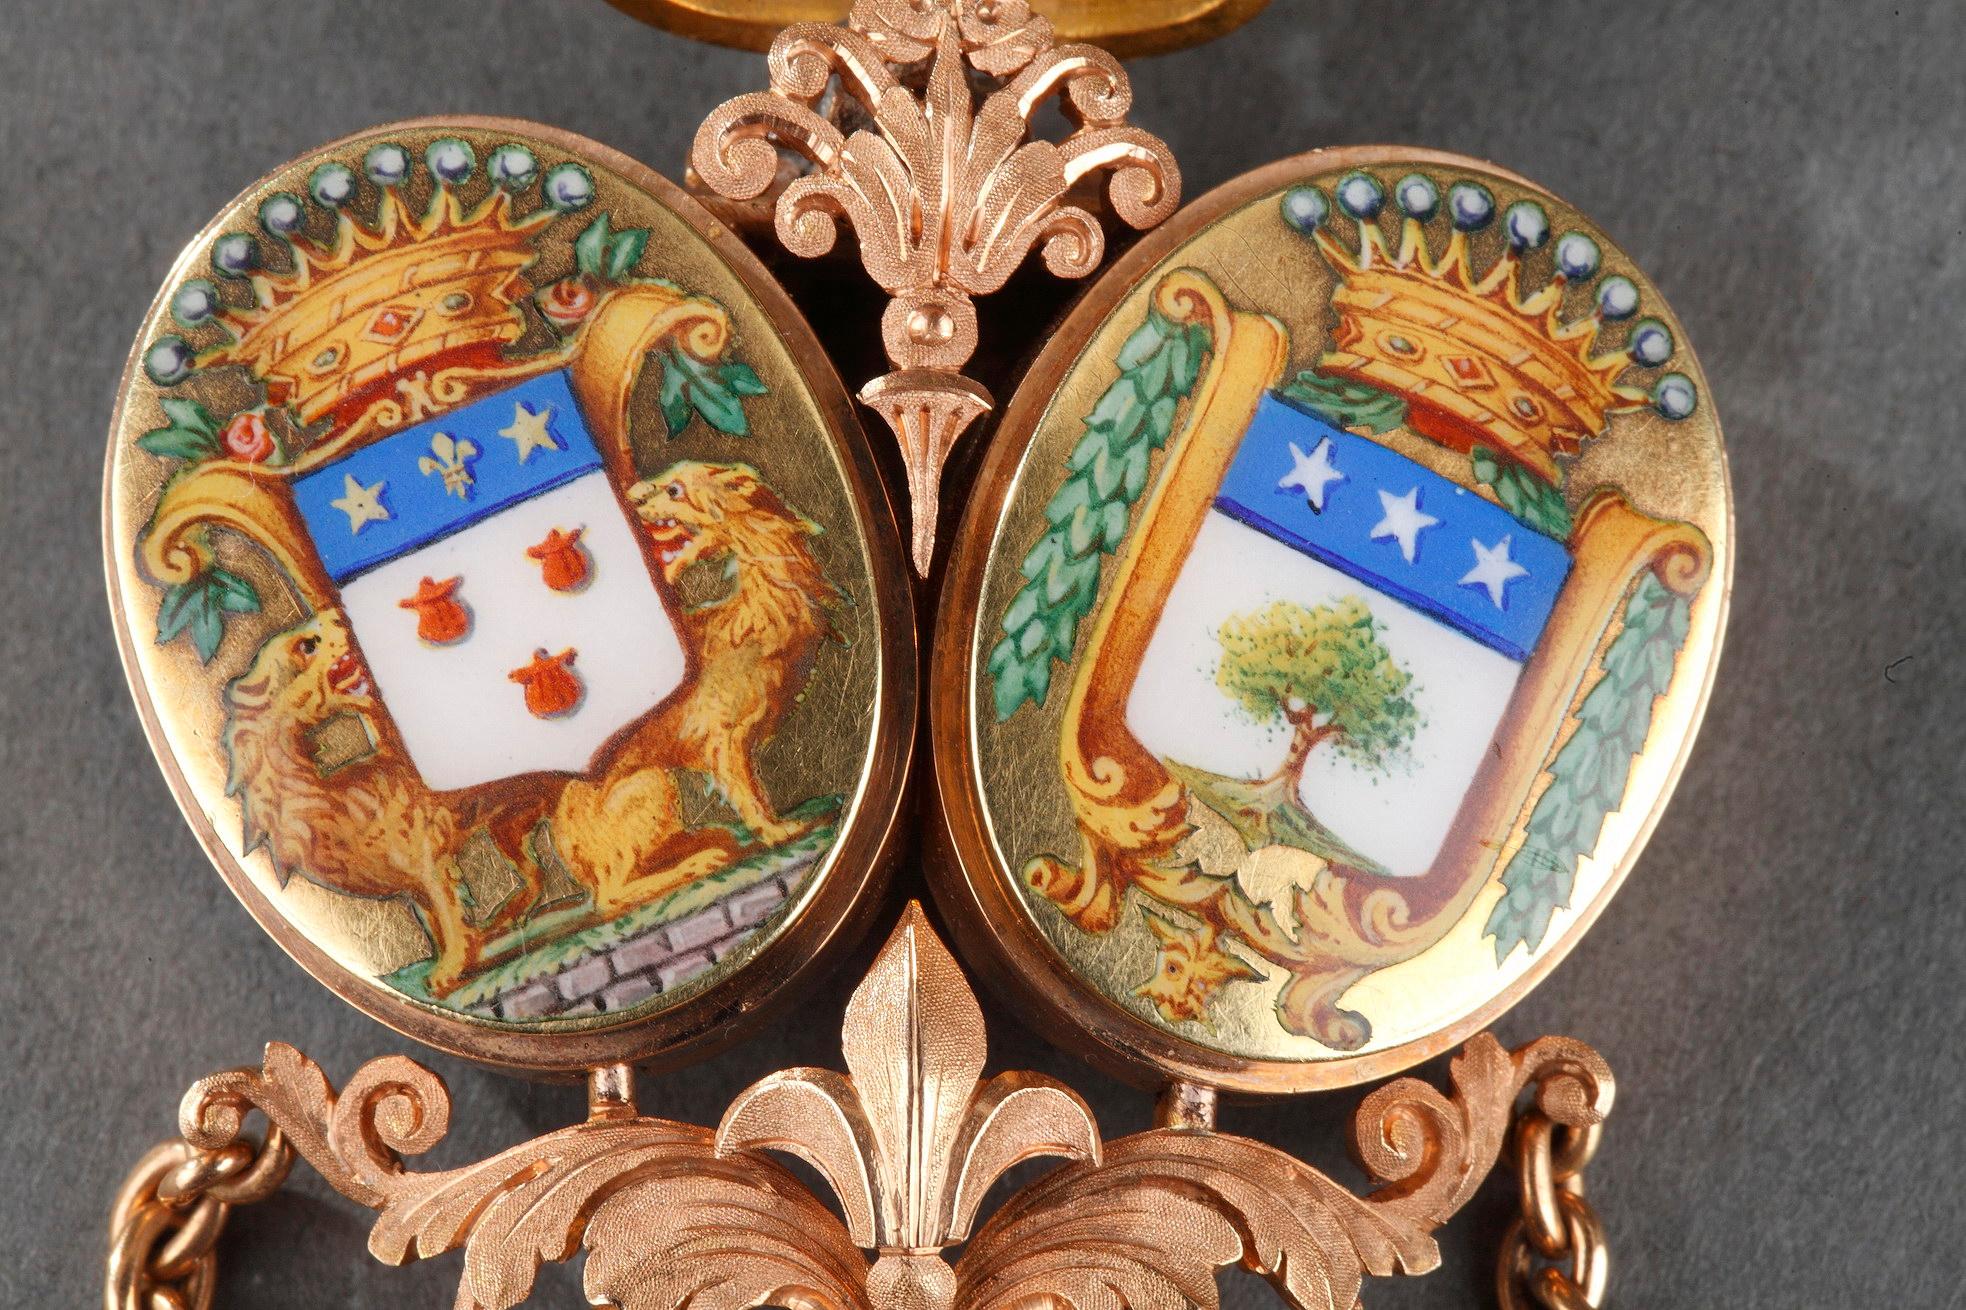 Chatelaine with belt hook in intricately sculpted, matte, pink gold. The piece is topped with a crown featuring pearls and semi-precious stones. Two coats of arms in multicolored enamel are set on gold under the crown, and under the coats of arms is